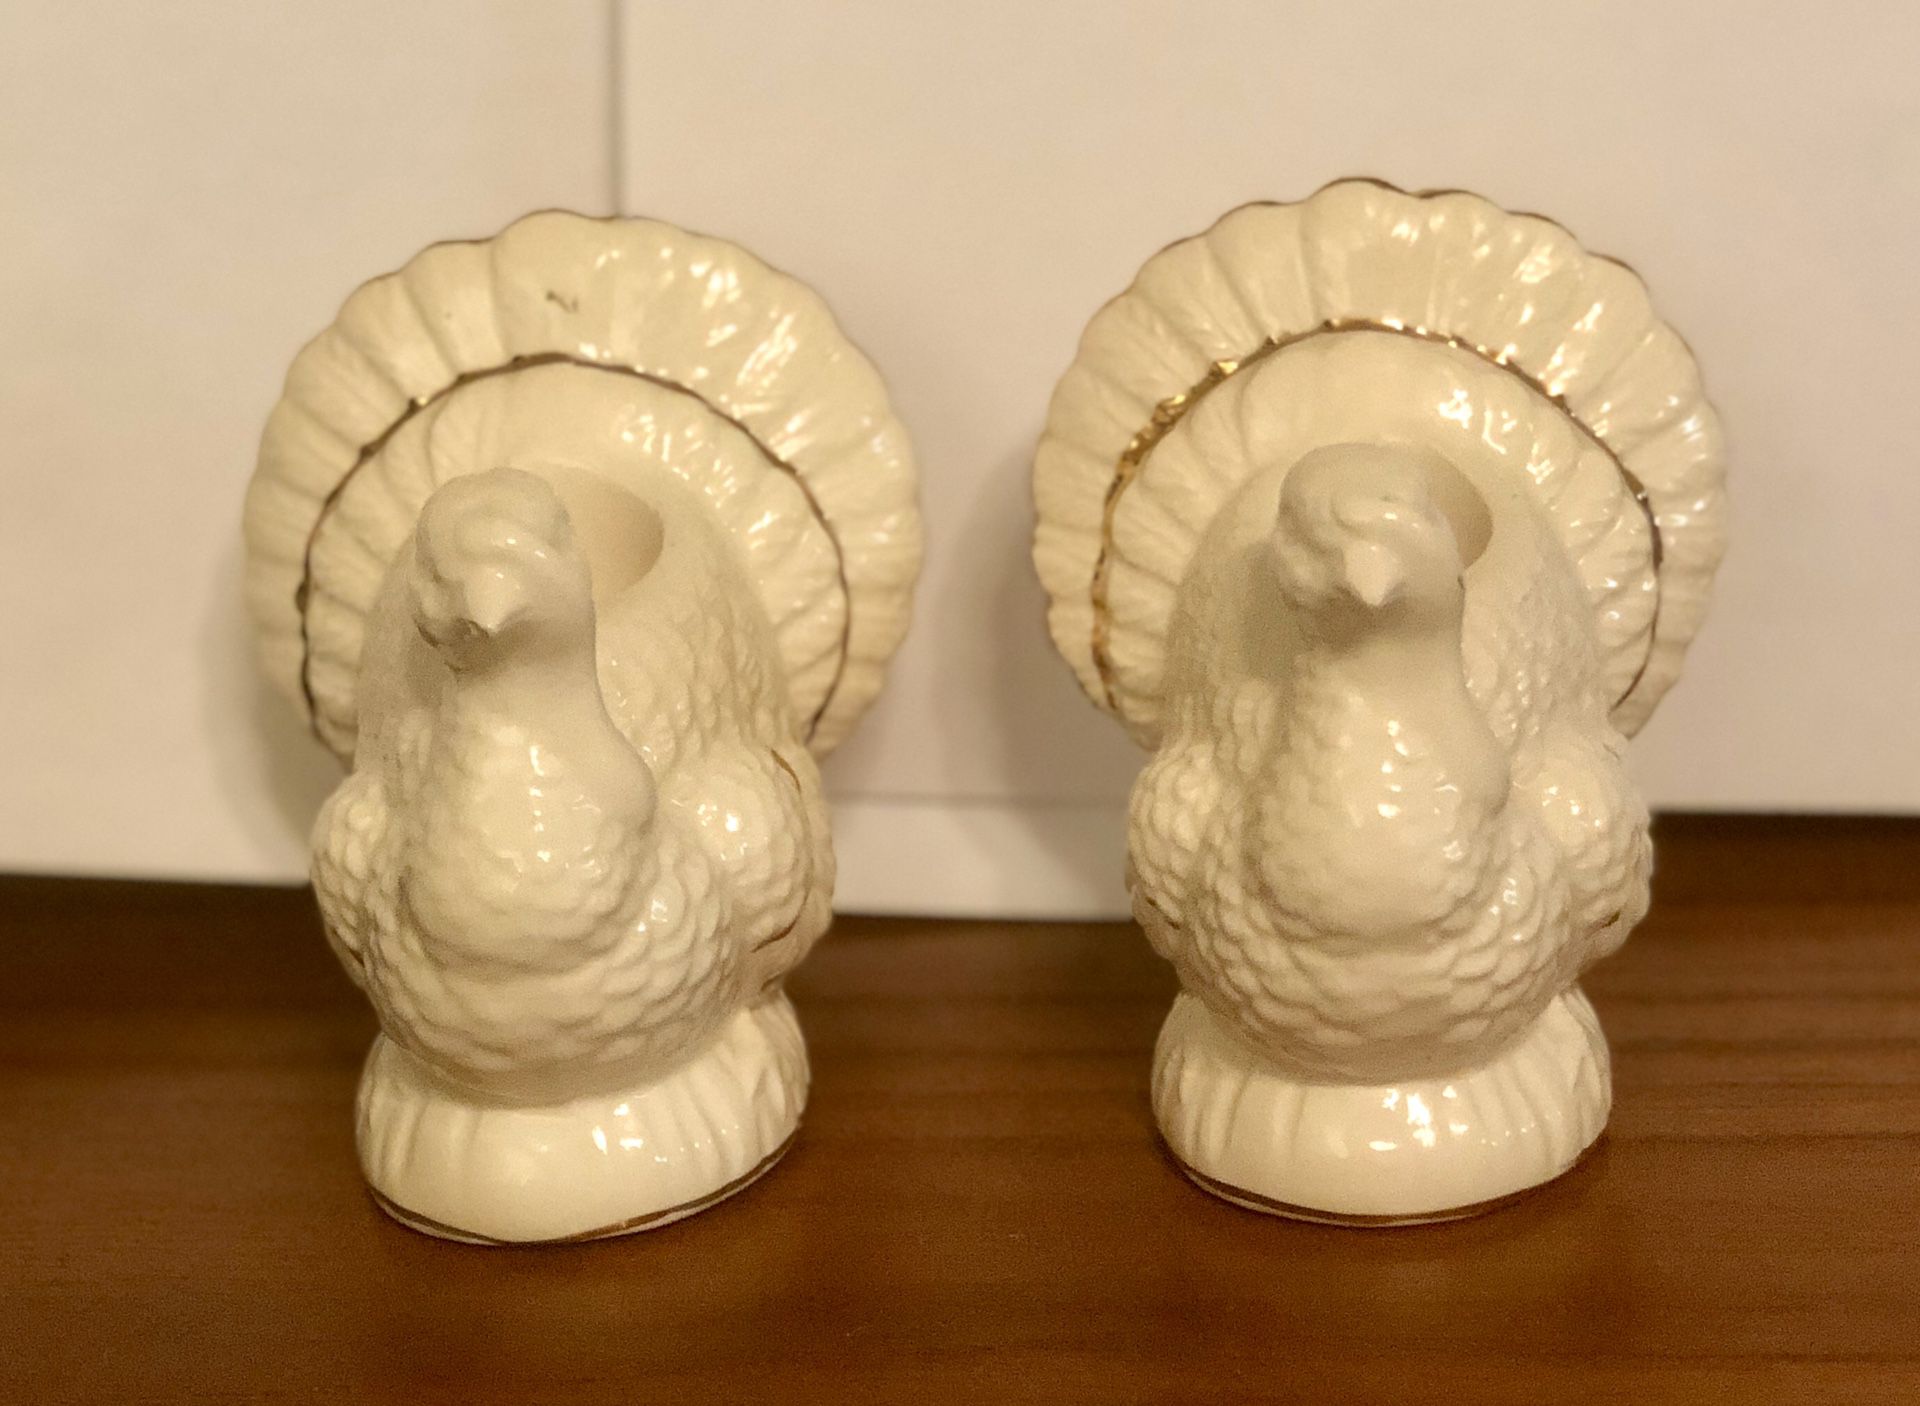 Gorgeous turkey candle holders🦃